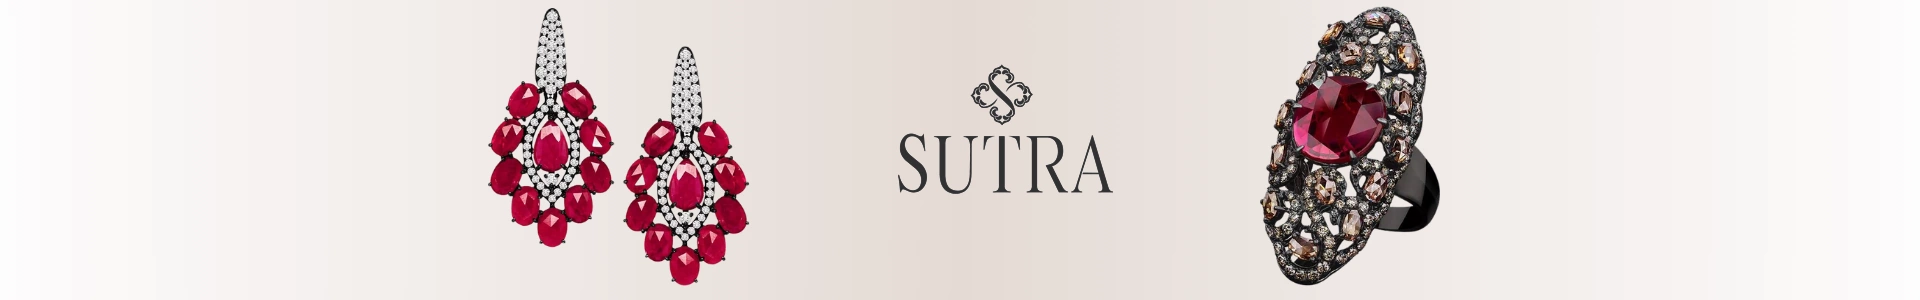 Sultra Jewelry